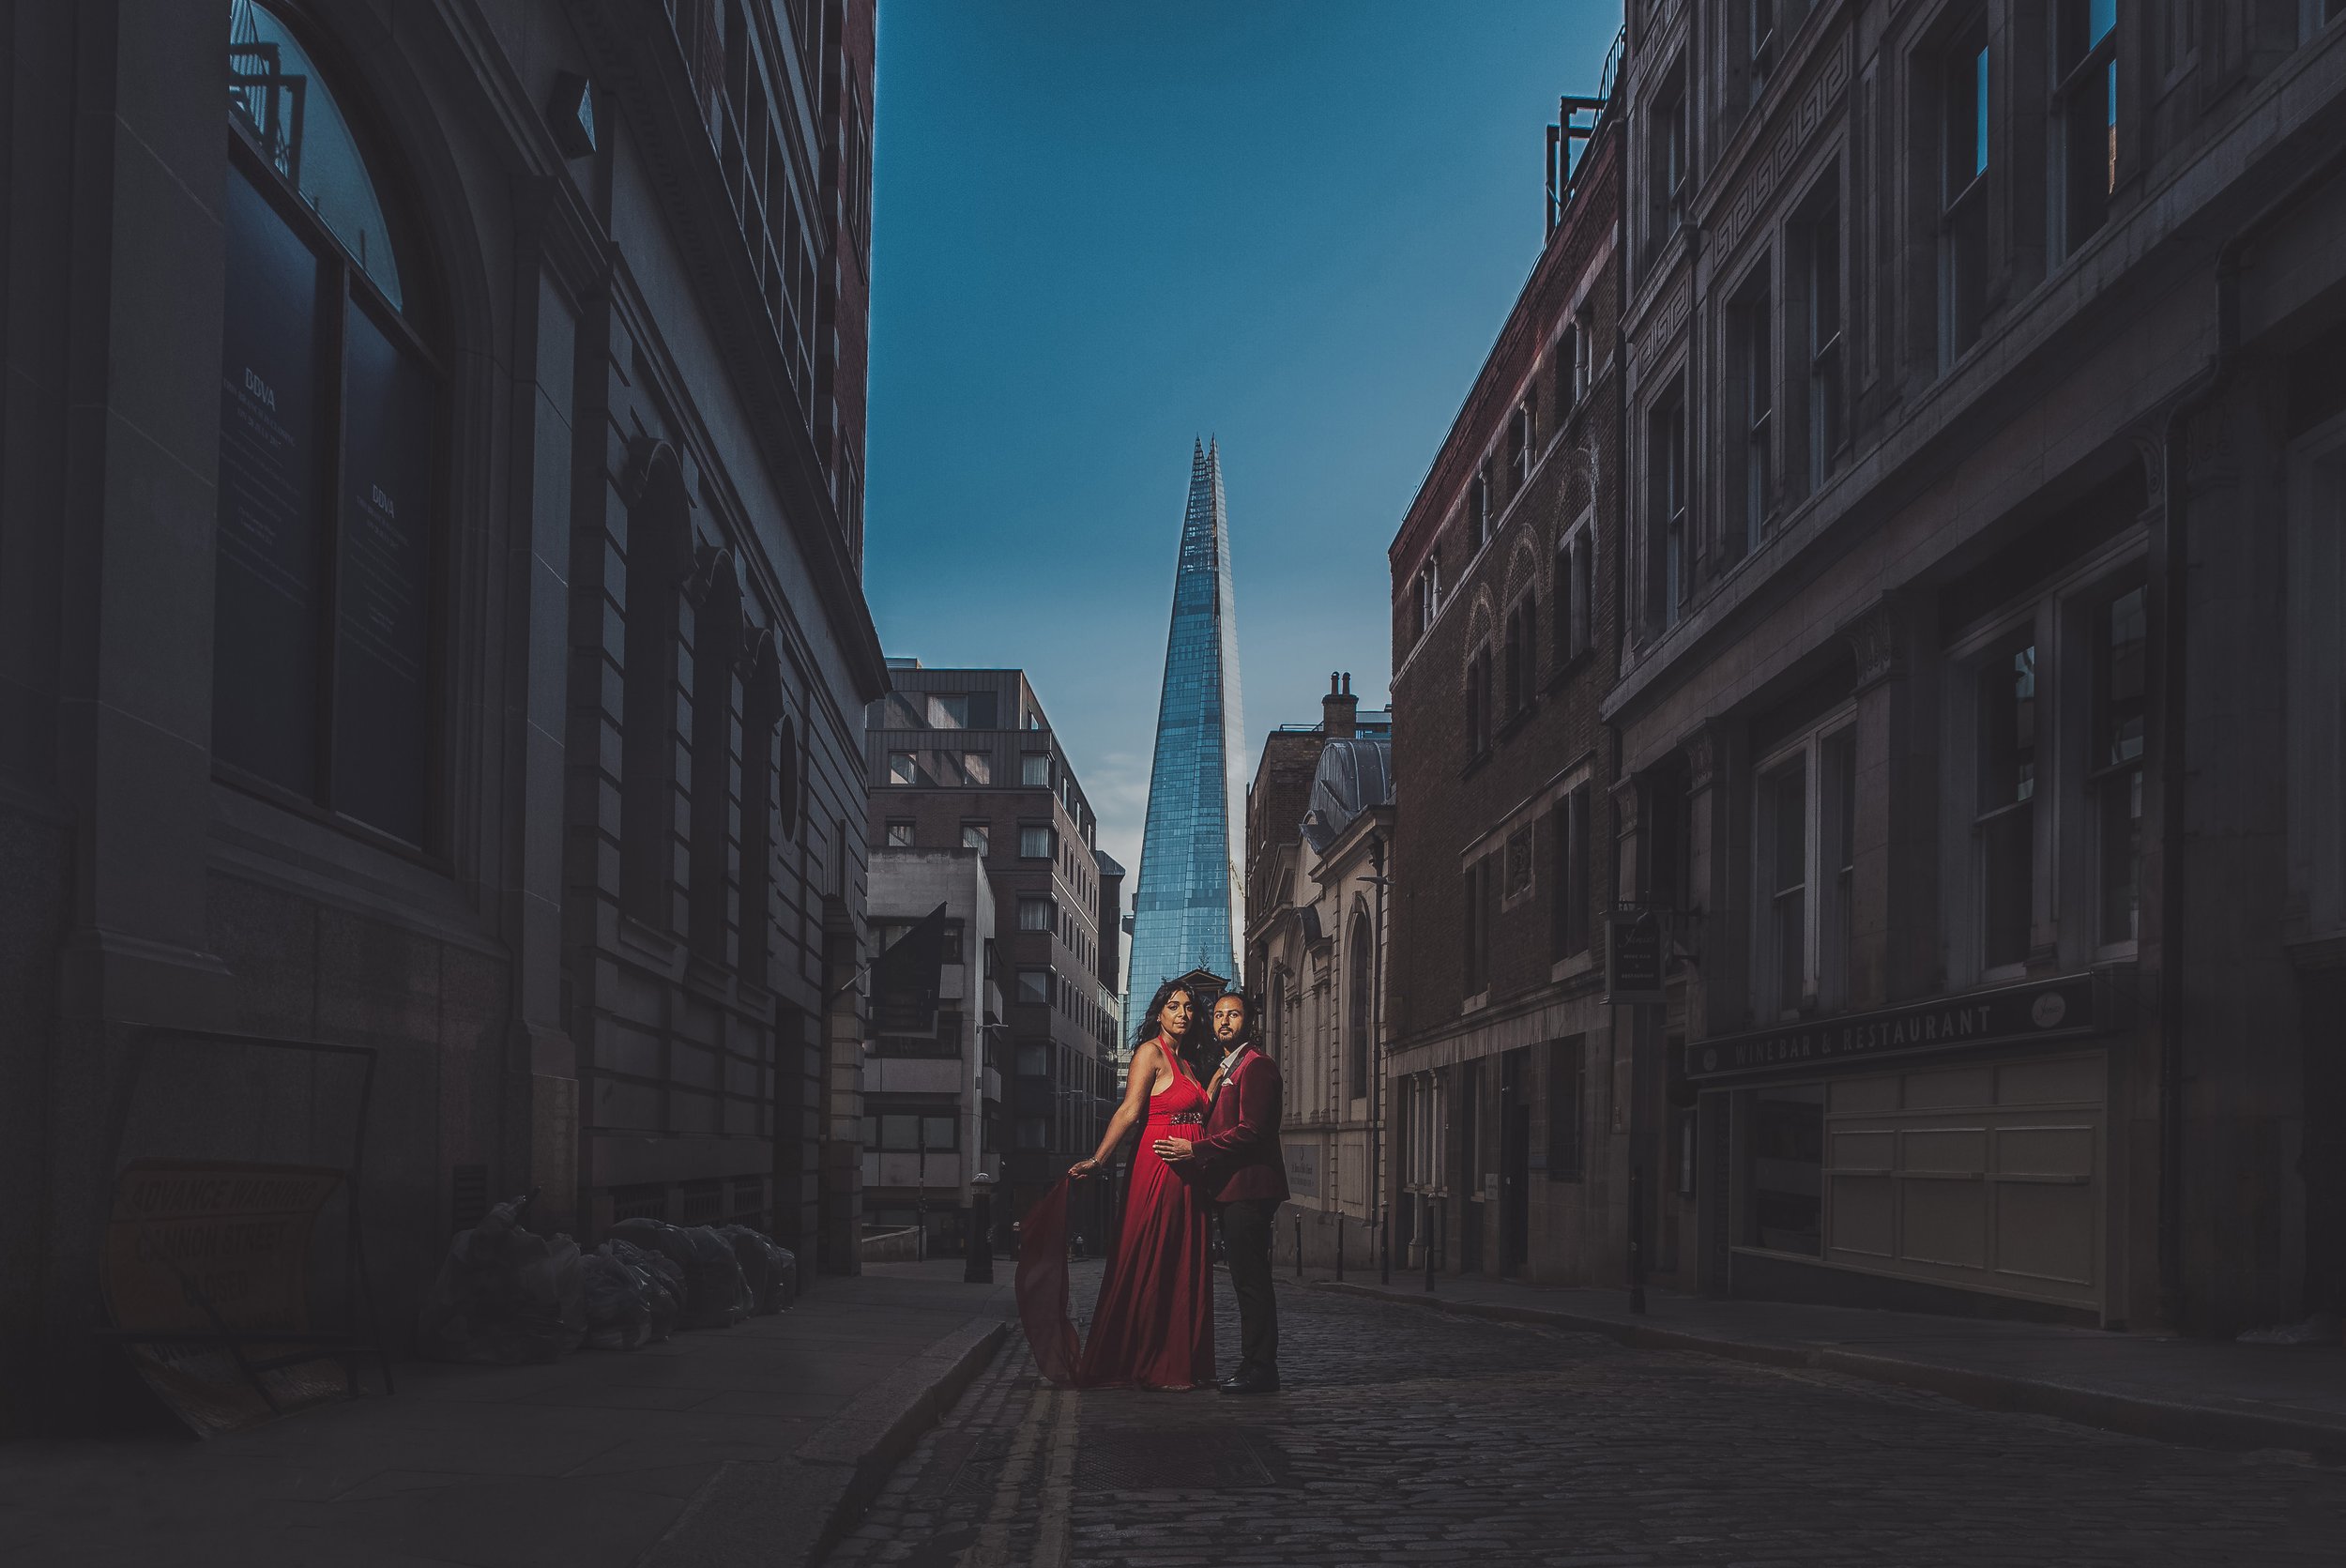 A fine art portrait of a couple in front of London's Shard building